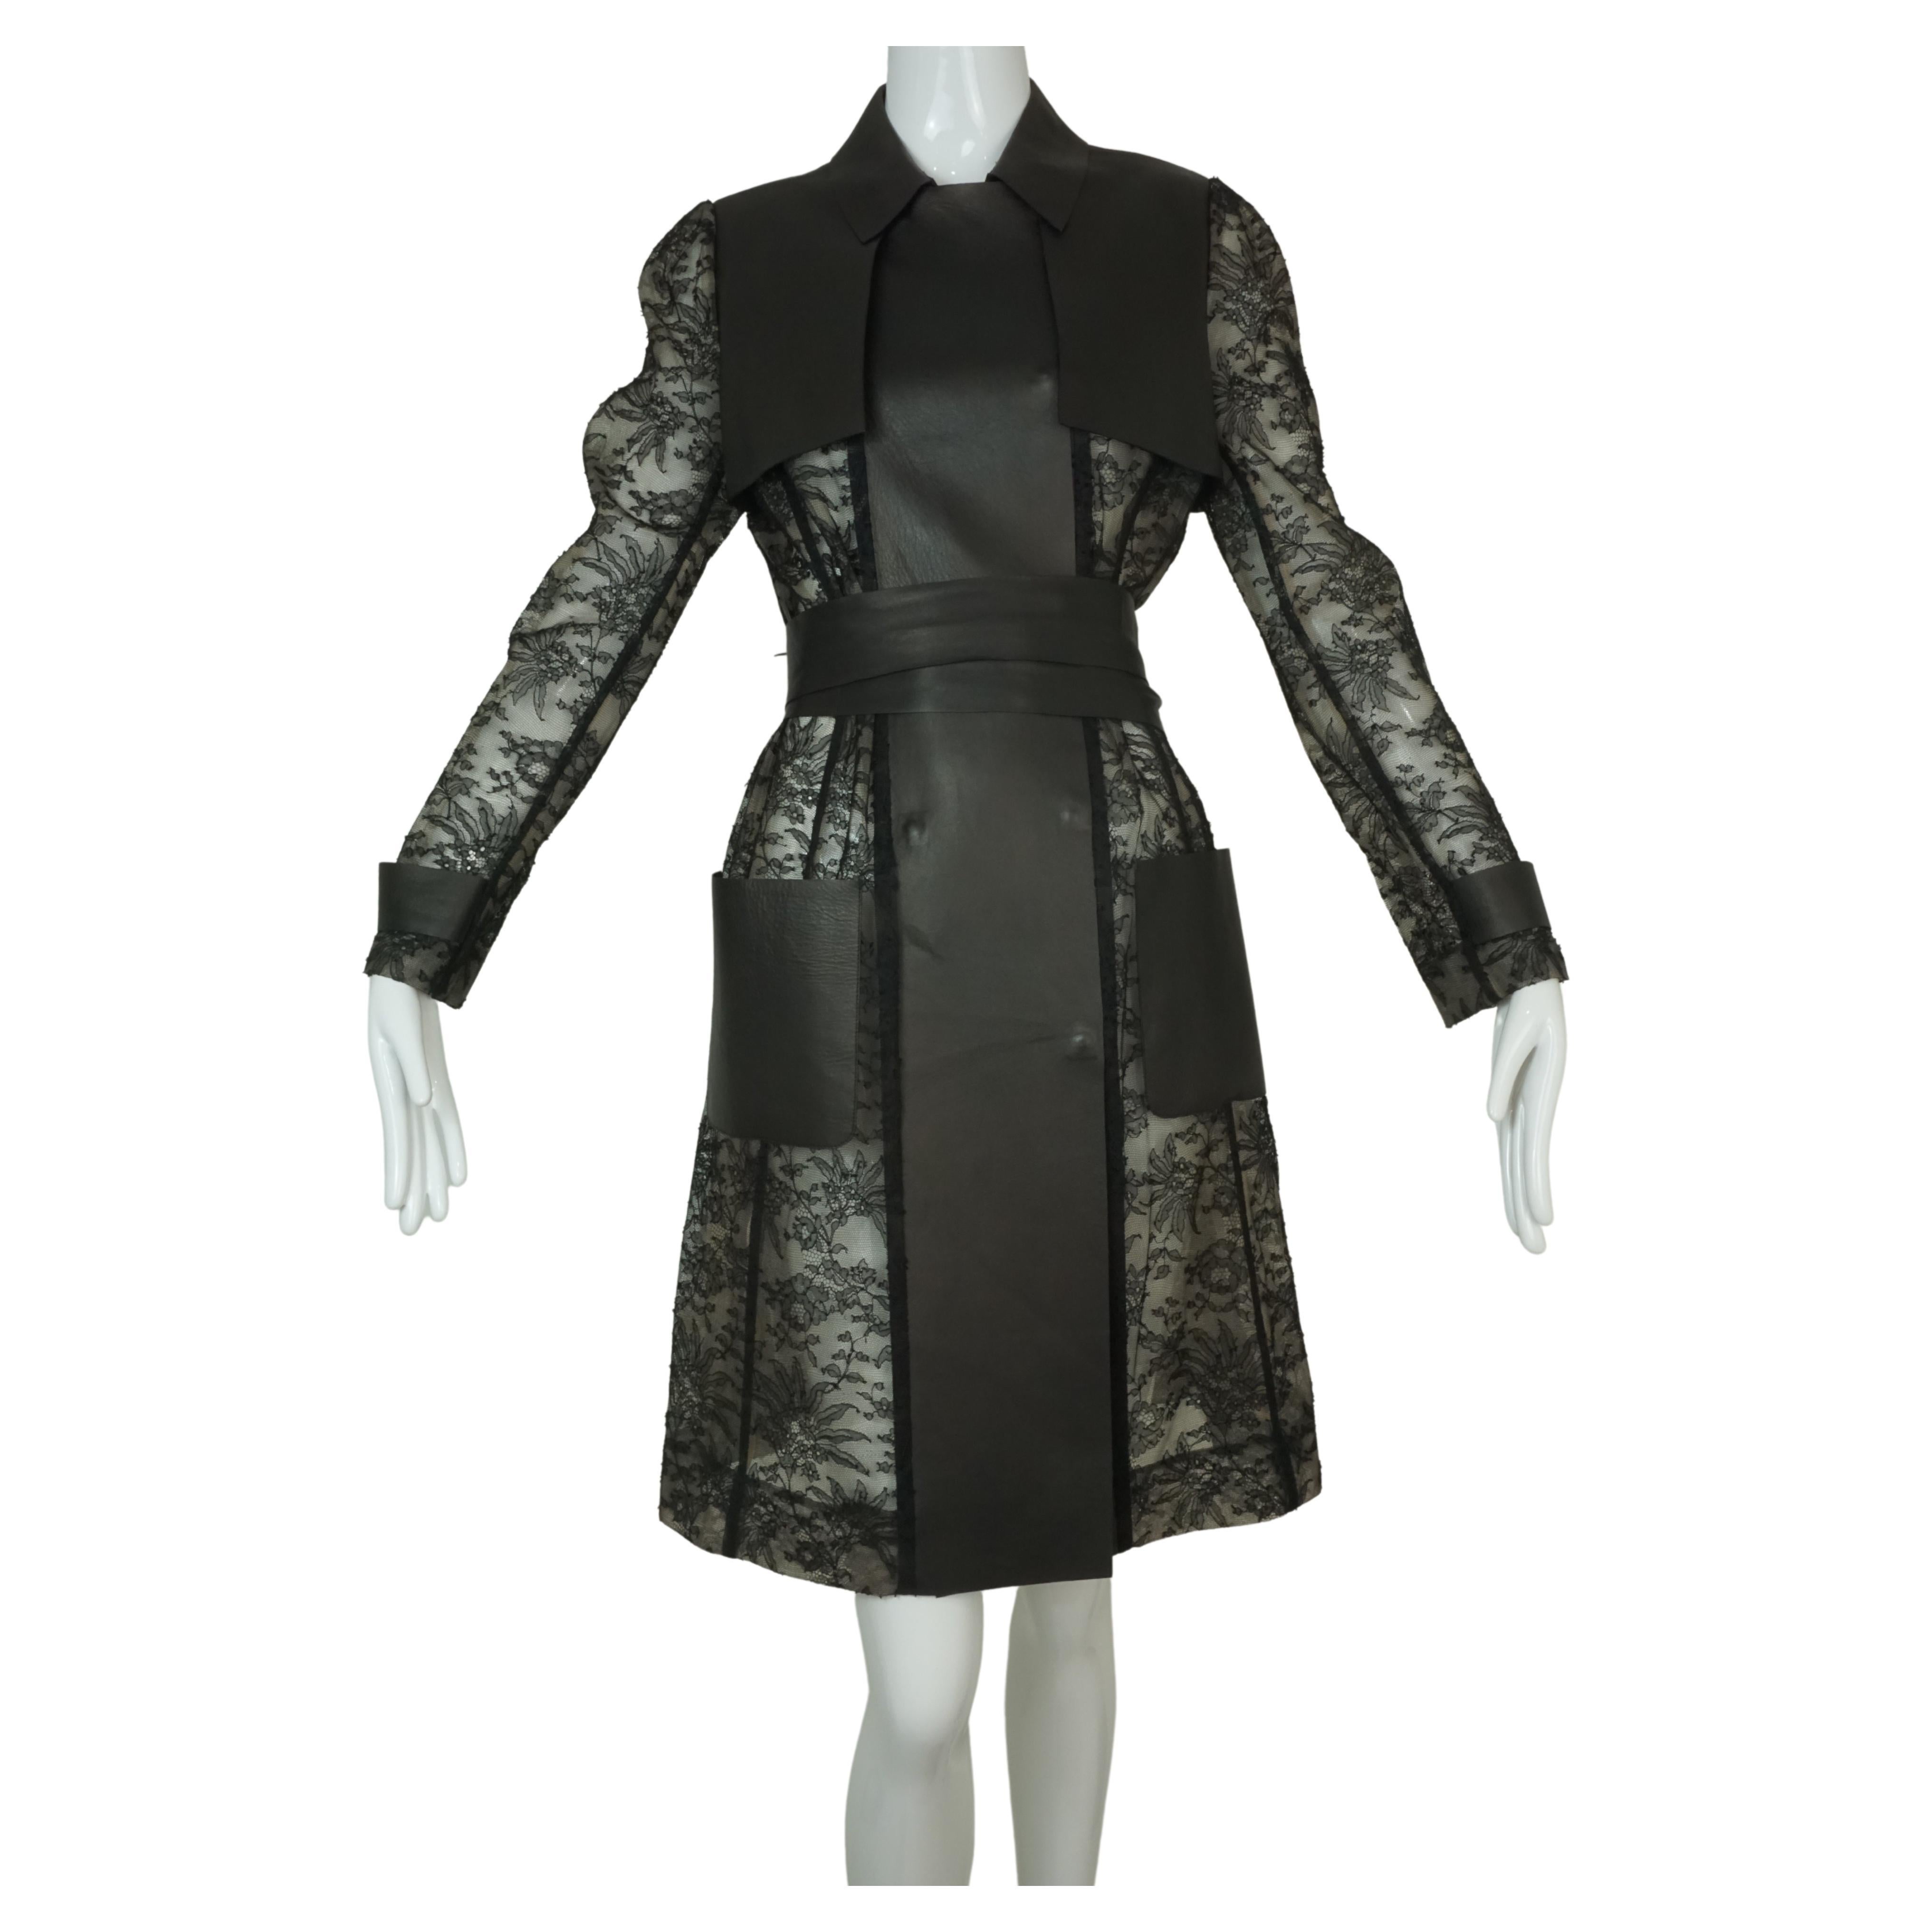 Valentino black lace and leather belted trench coat from 2011. Look 1 of the resort 2011 runway. US size 8. Made in Italy. Excellent Condition.


Foxy Couture is not an authorized reseller nor affiliated with any of the brands we